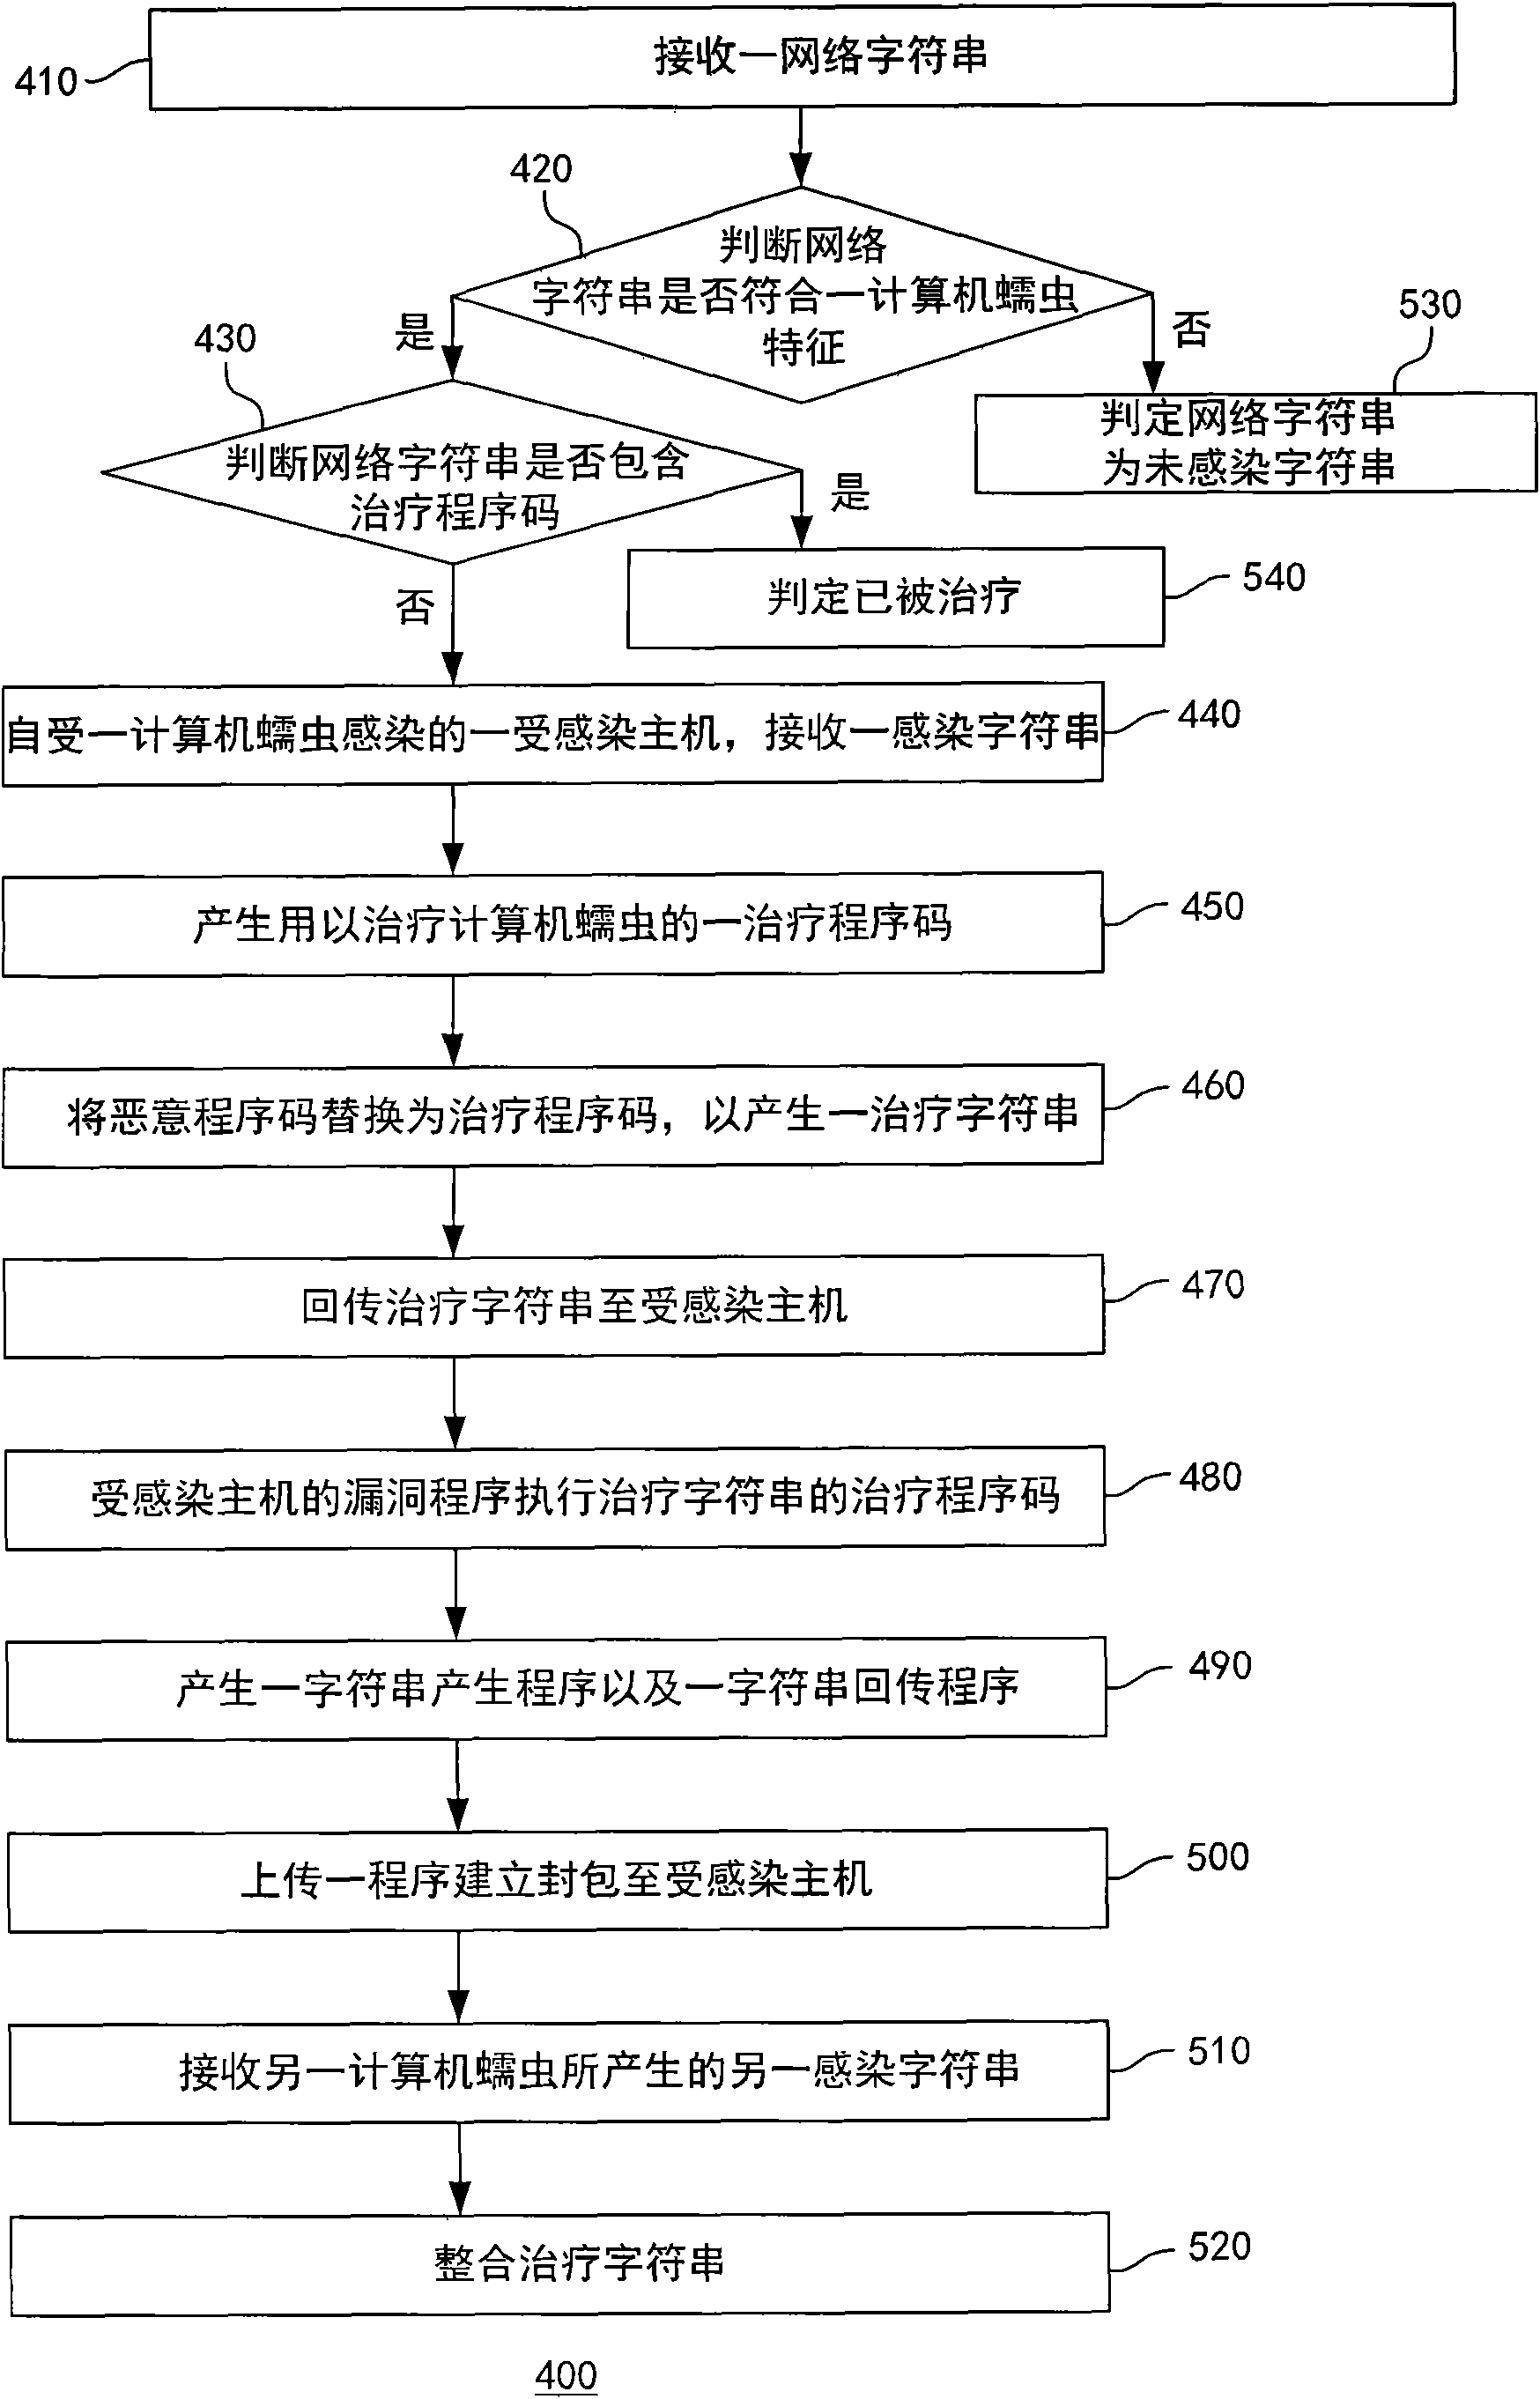 System and method for treating computer worms